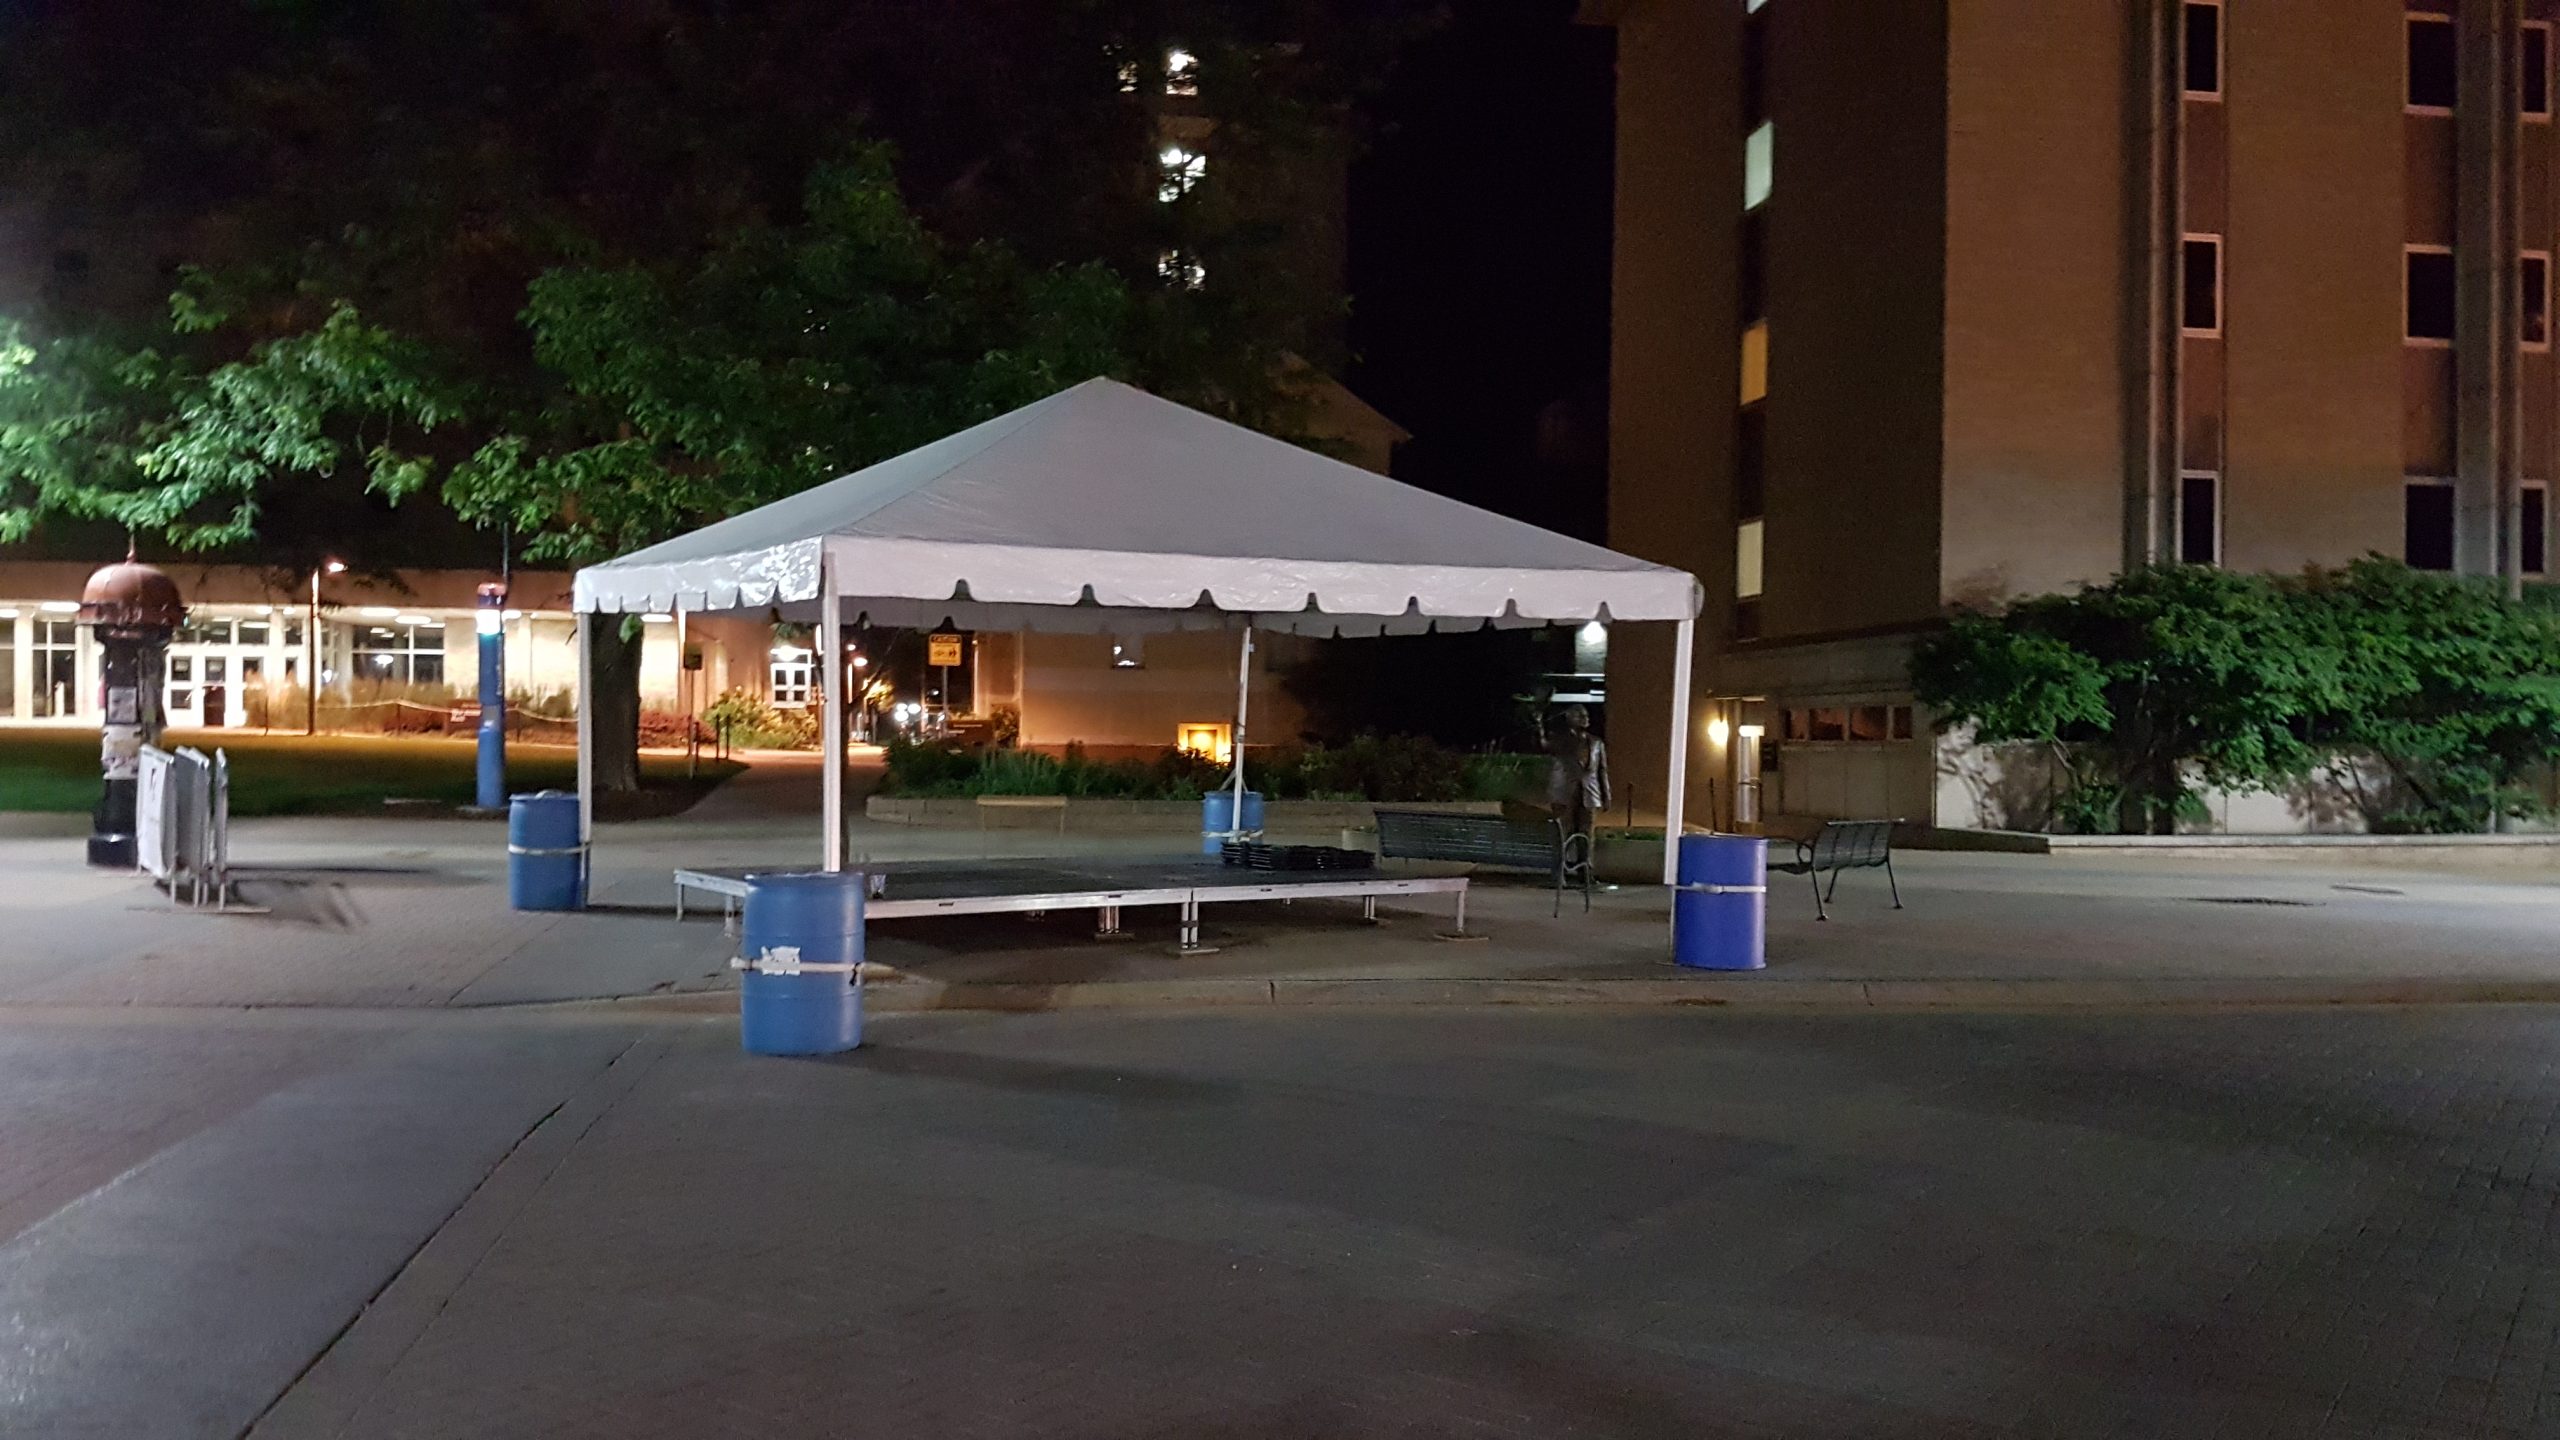 20' x 20 frame tent with stage set up at night